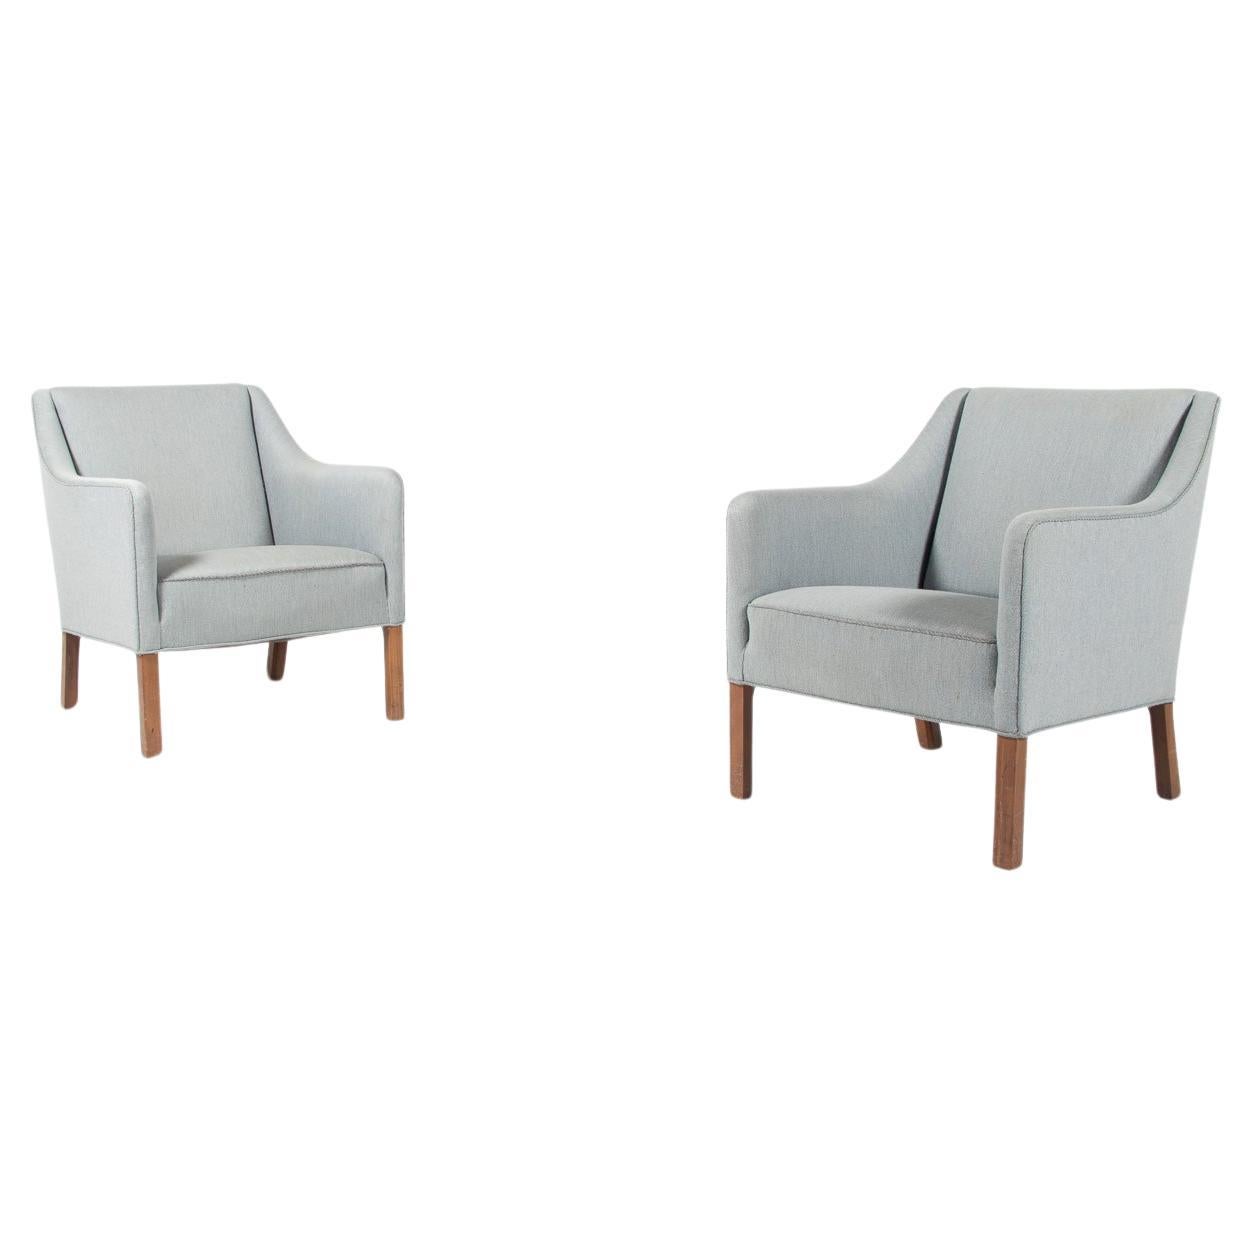 Set of two Danish Modern club chairs from Einar Larsen, 1950’s For Sale